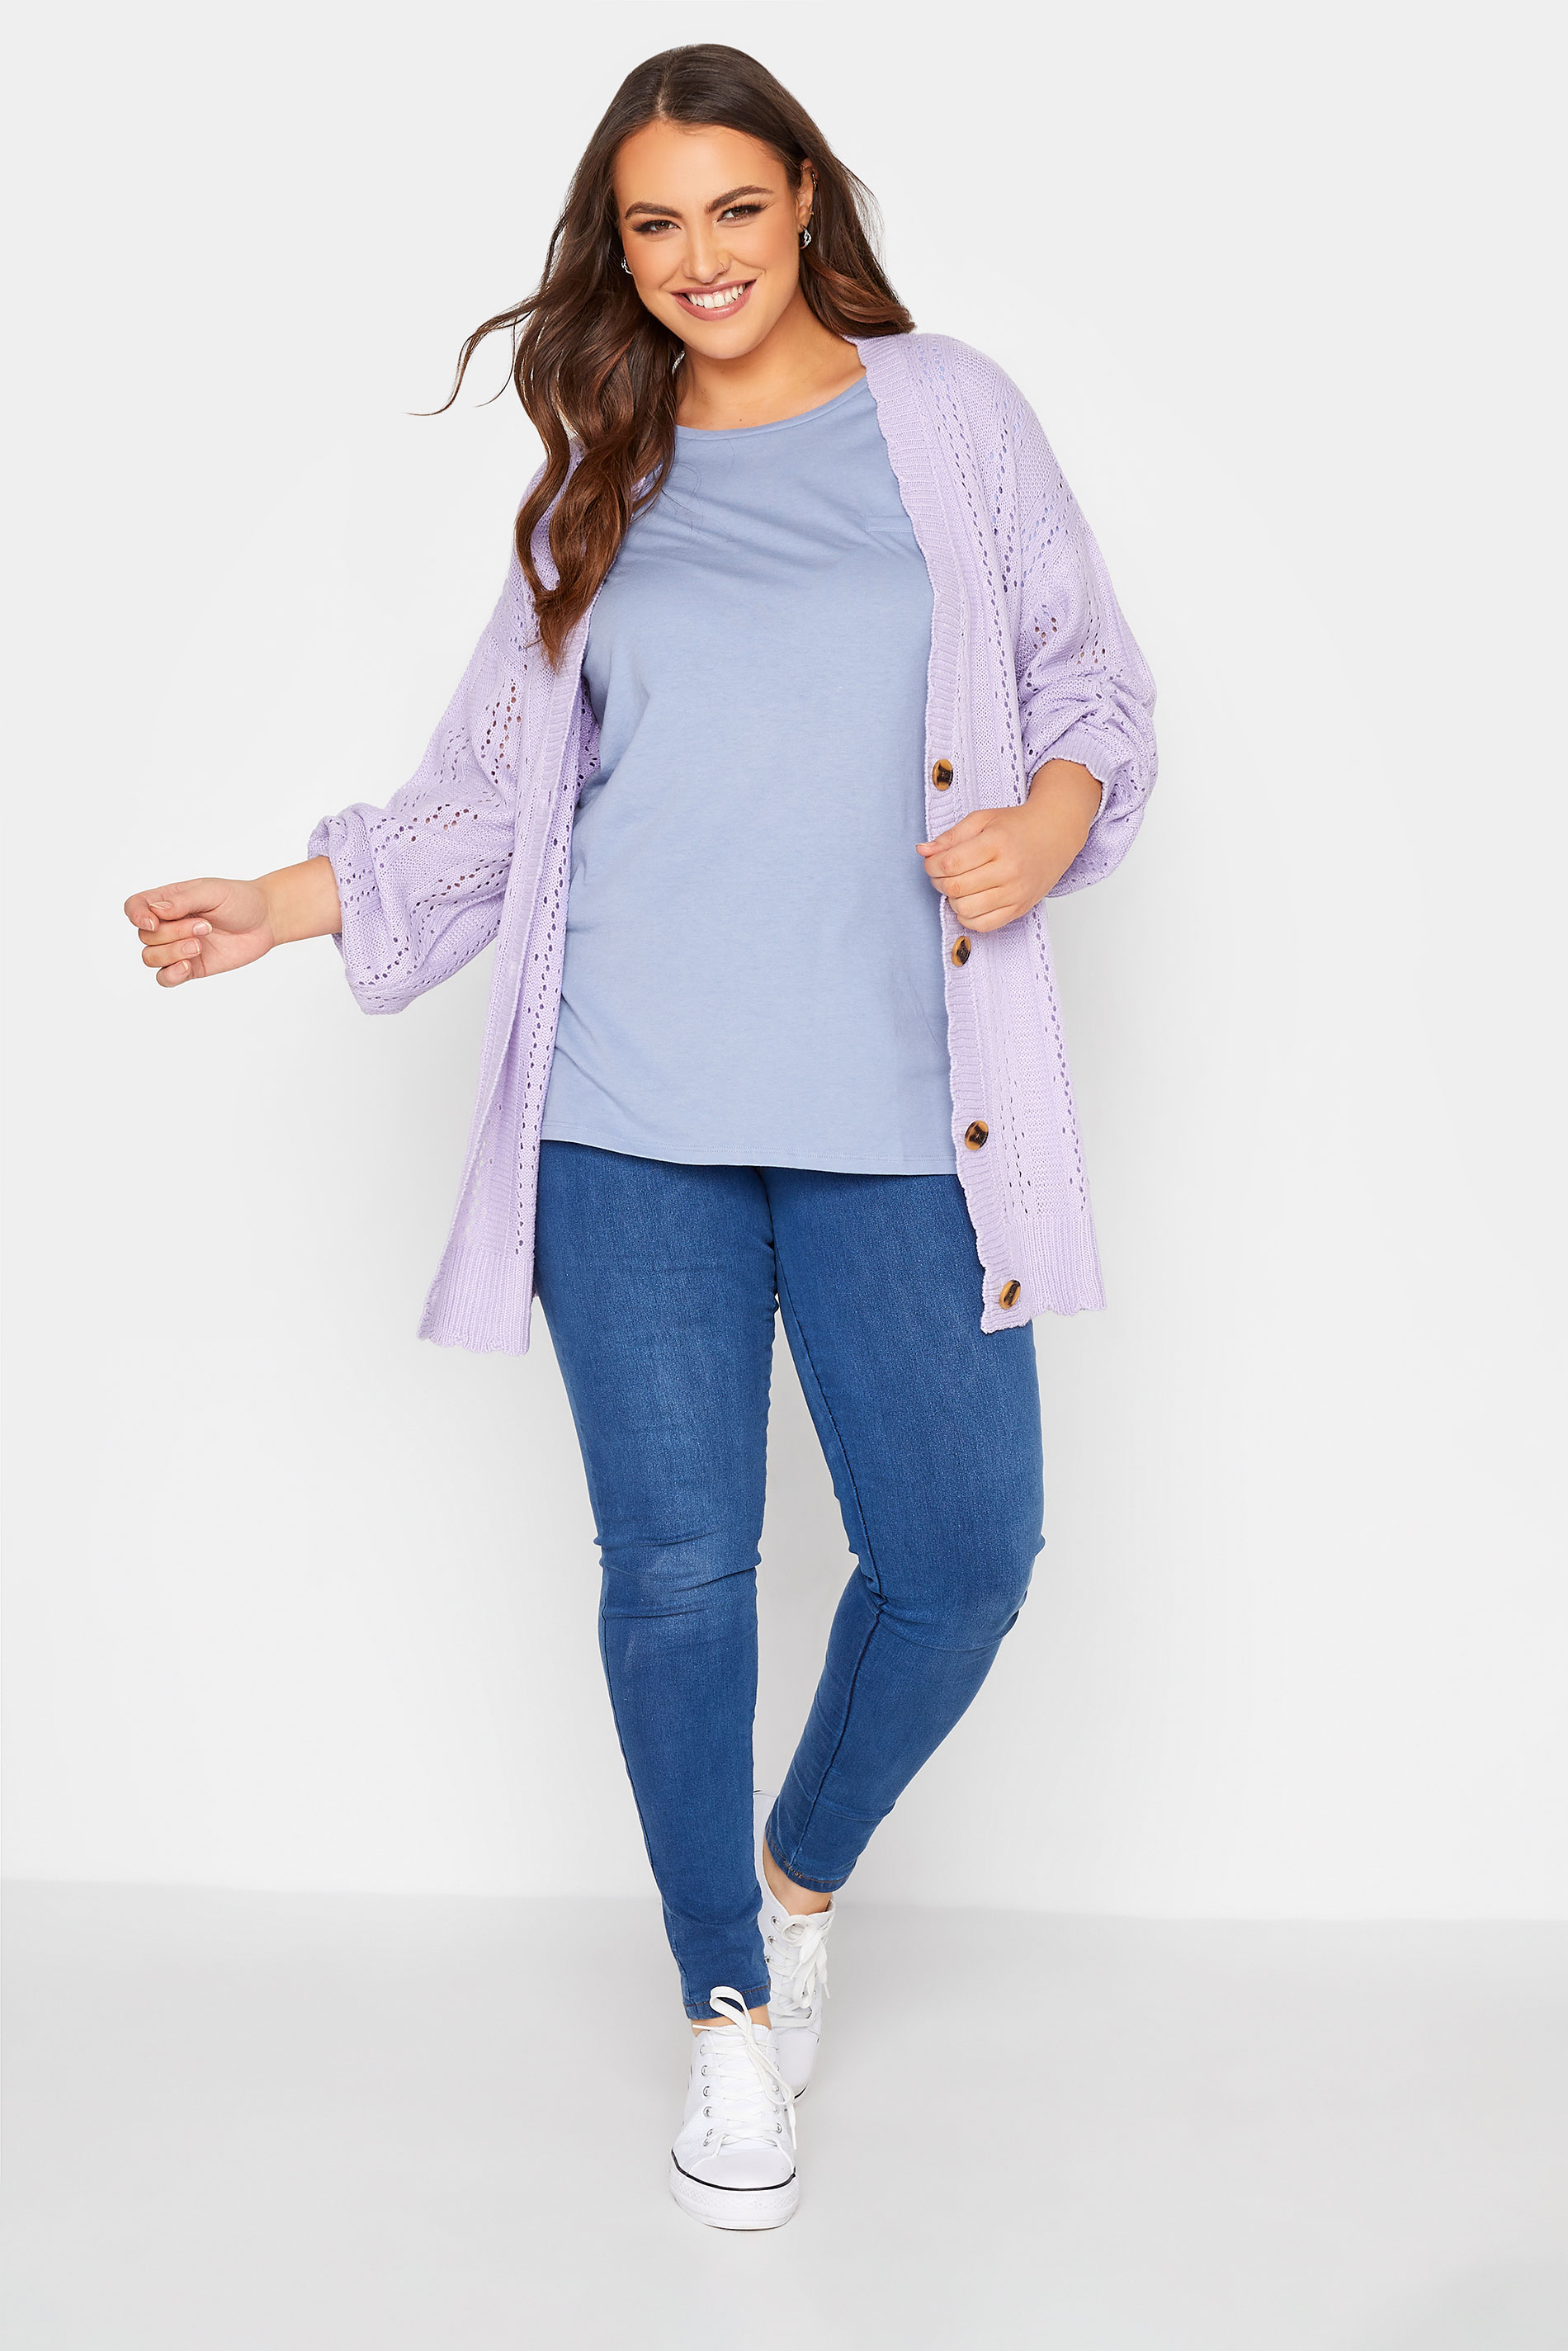 Grande taille  Tops Grande taille  Tops Casual | YOURS FOR GOOD - T-Shirt Bleu en Coton Mixte - BF12927